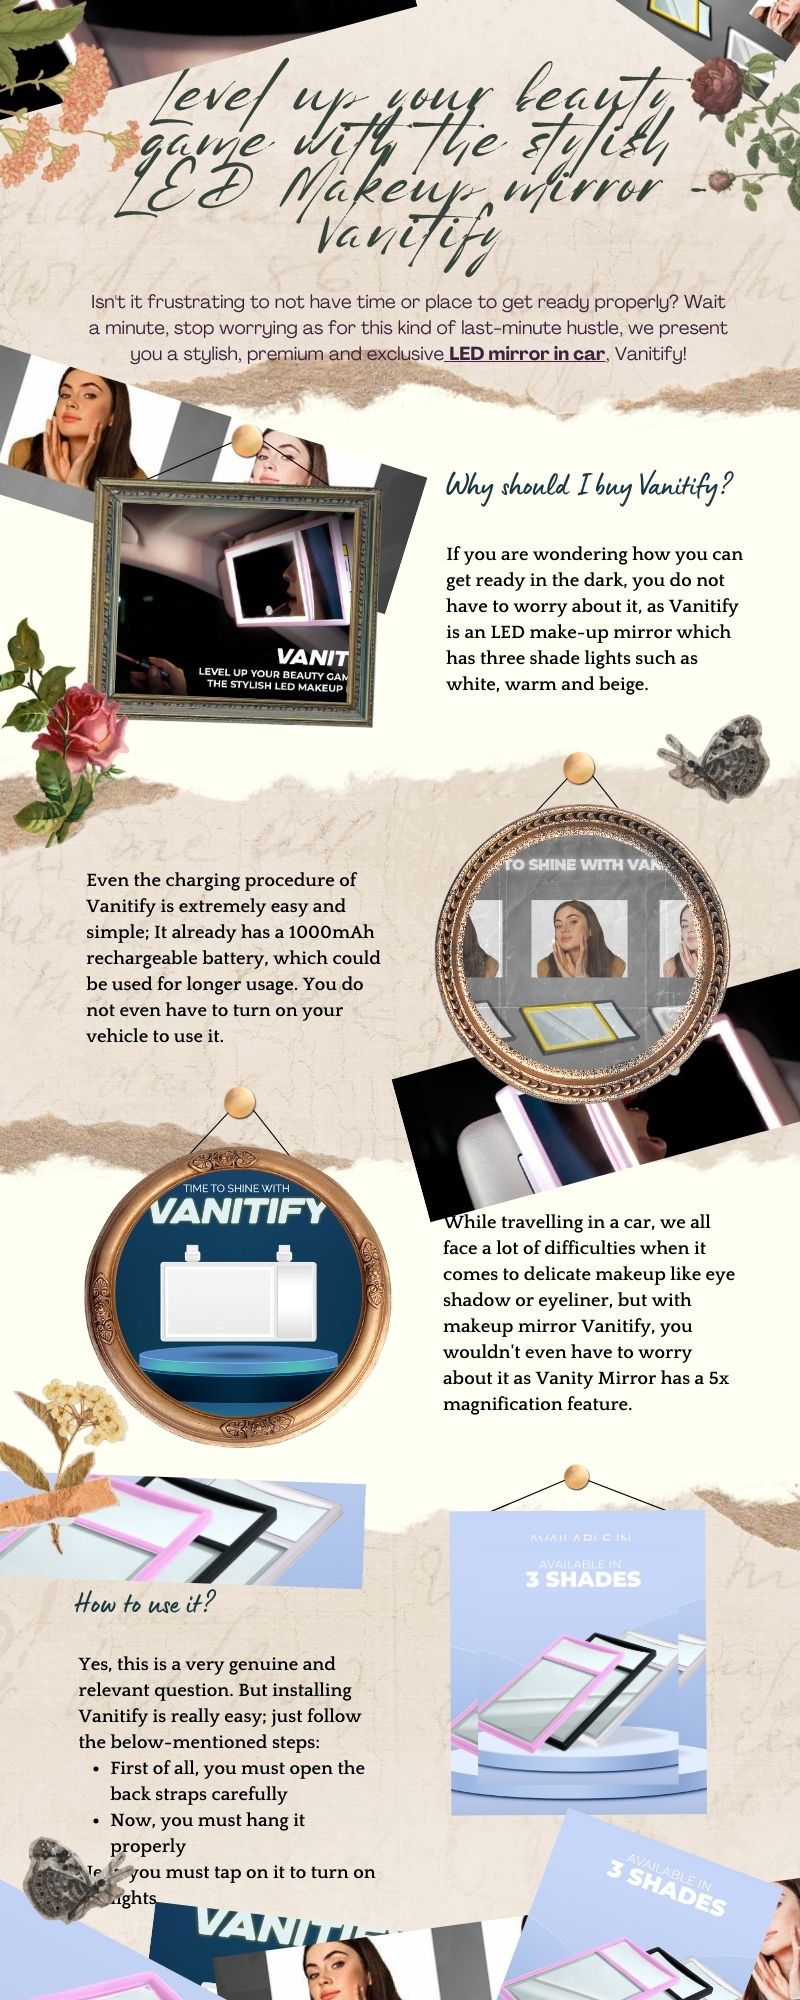 Level up your beauty game with the stylish LED Makeup mirror – Vanitify